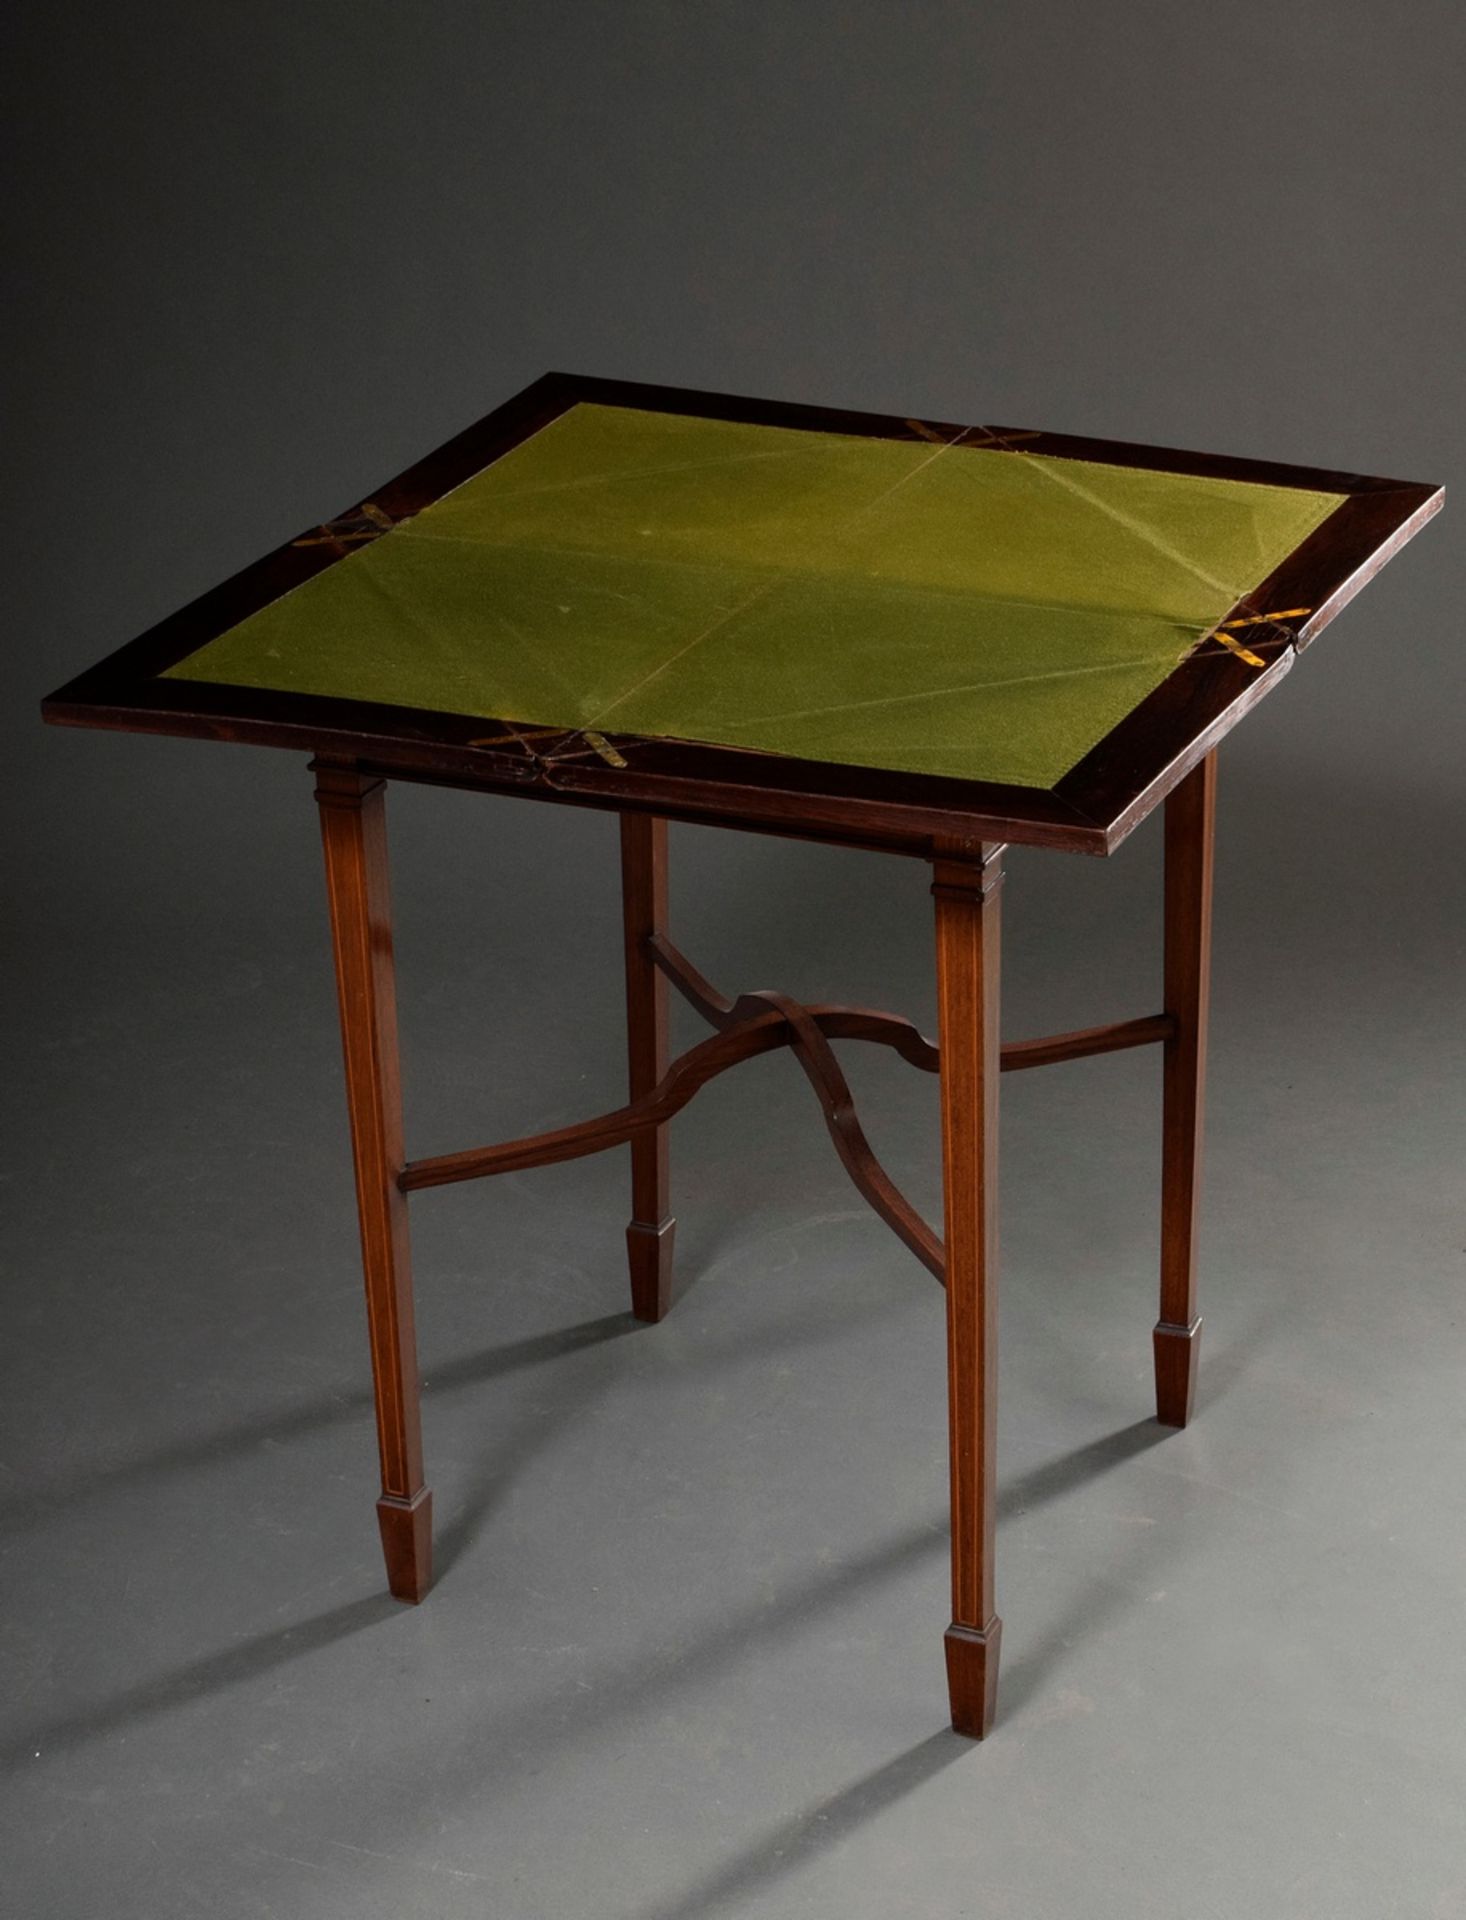 Victorian bridge table with four folding tops and felt cover, mahogany with fine ribbon inlays, Eng - Image 4 of 7